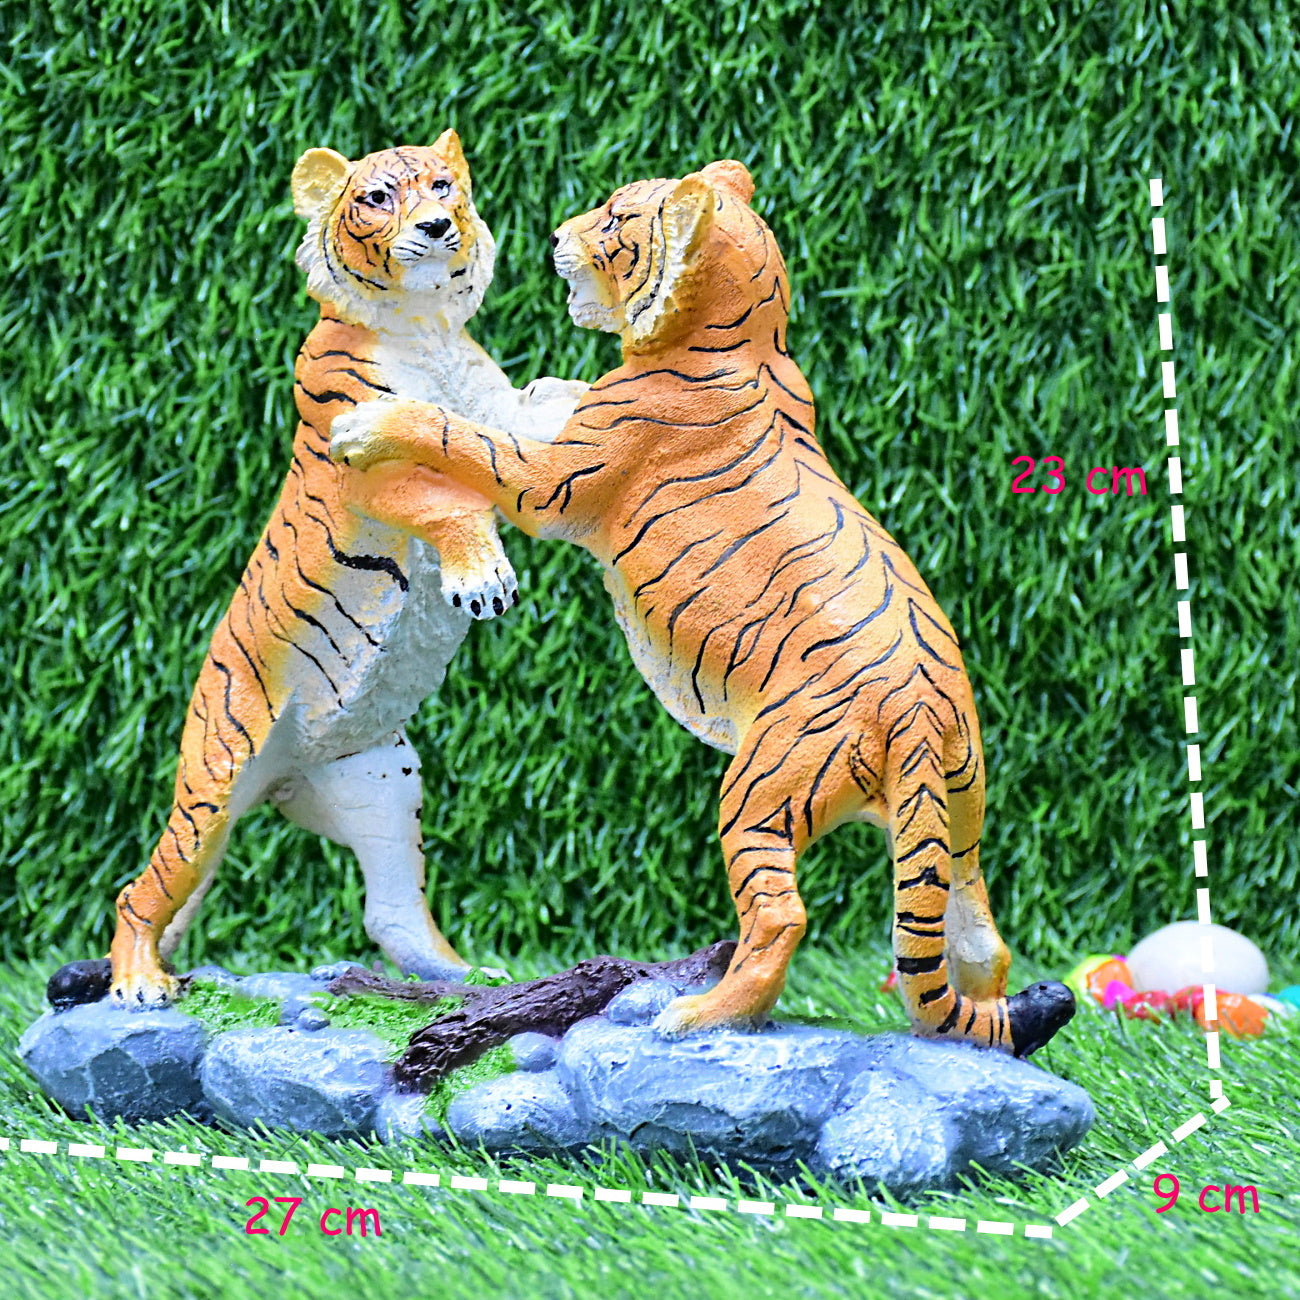 Playing Bengal Tiger  Pair Collectible Wild Cat Animal  Garden Decoration Figurine Statue